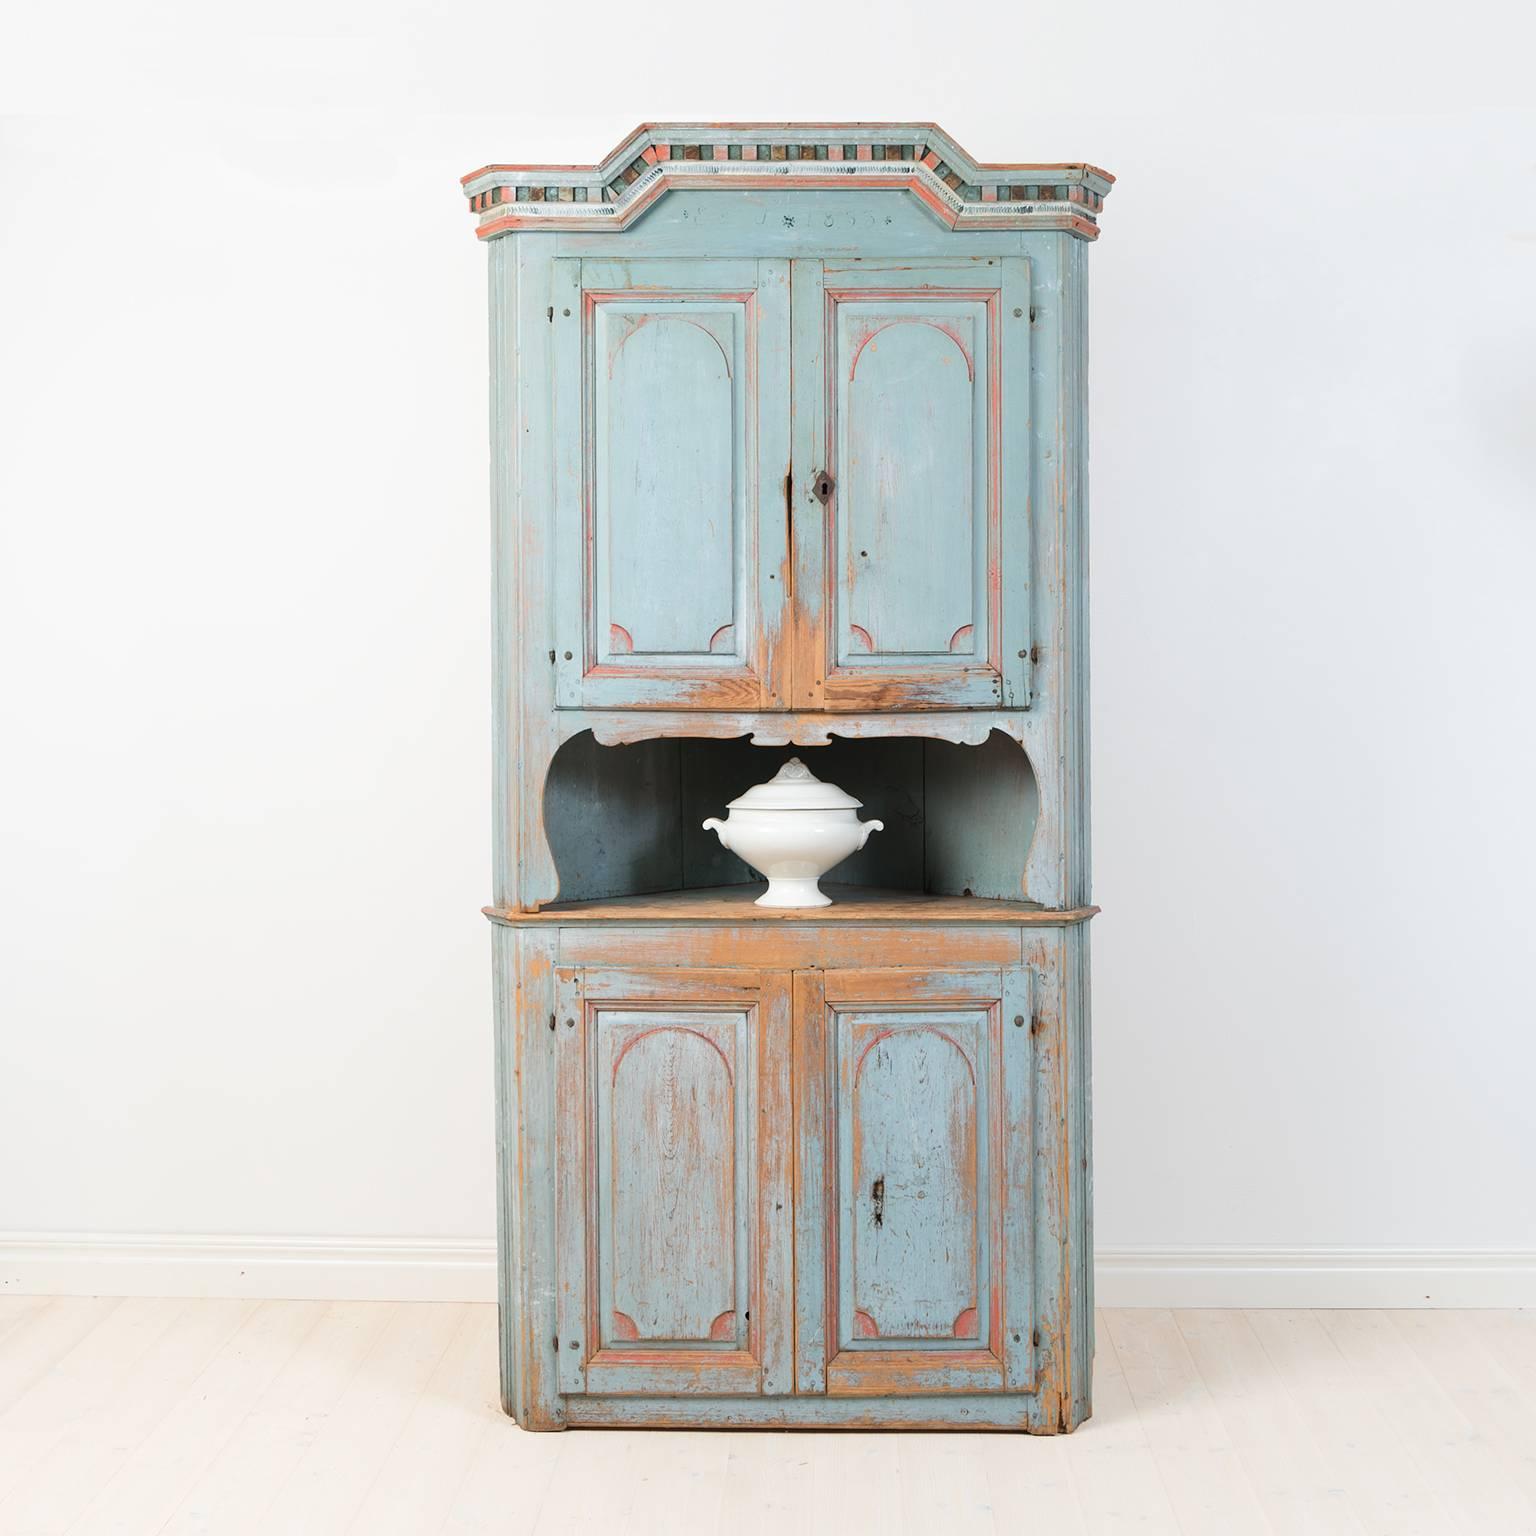 Charming Folk Art corner cupboard from northern Sweden with dating 1853. The cabinet is completely untouched and still has its natural patina from the 1800s. Two-pieced.